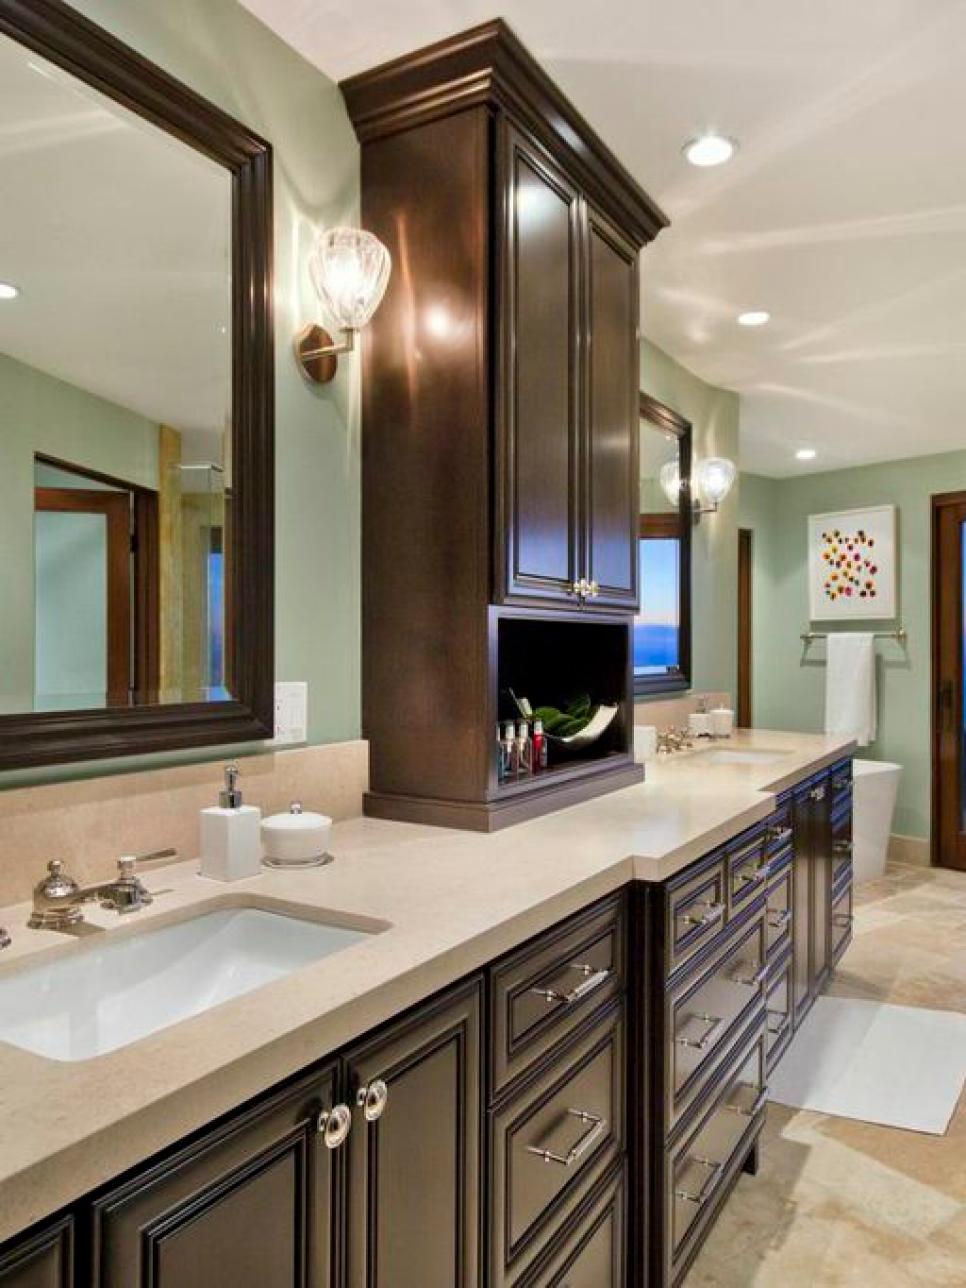 Light Blue Bathroom With Dark Cabinets and Freestanding Tub